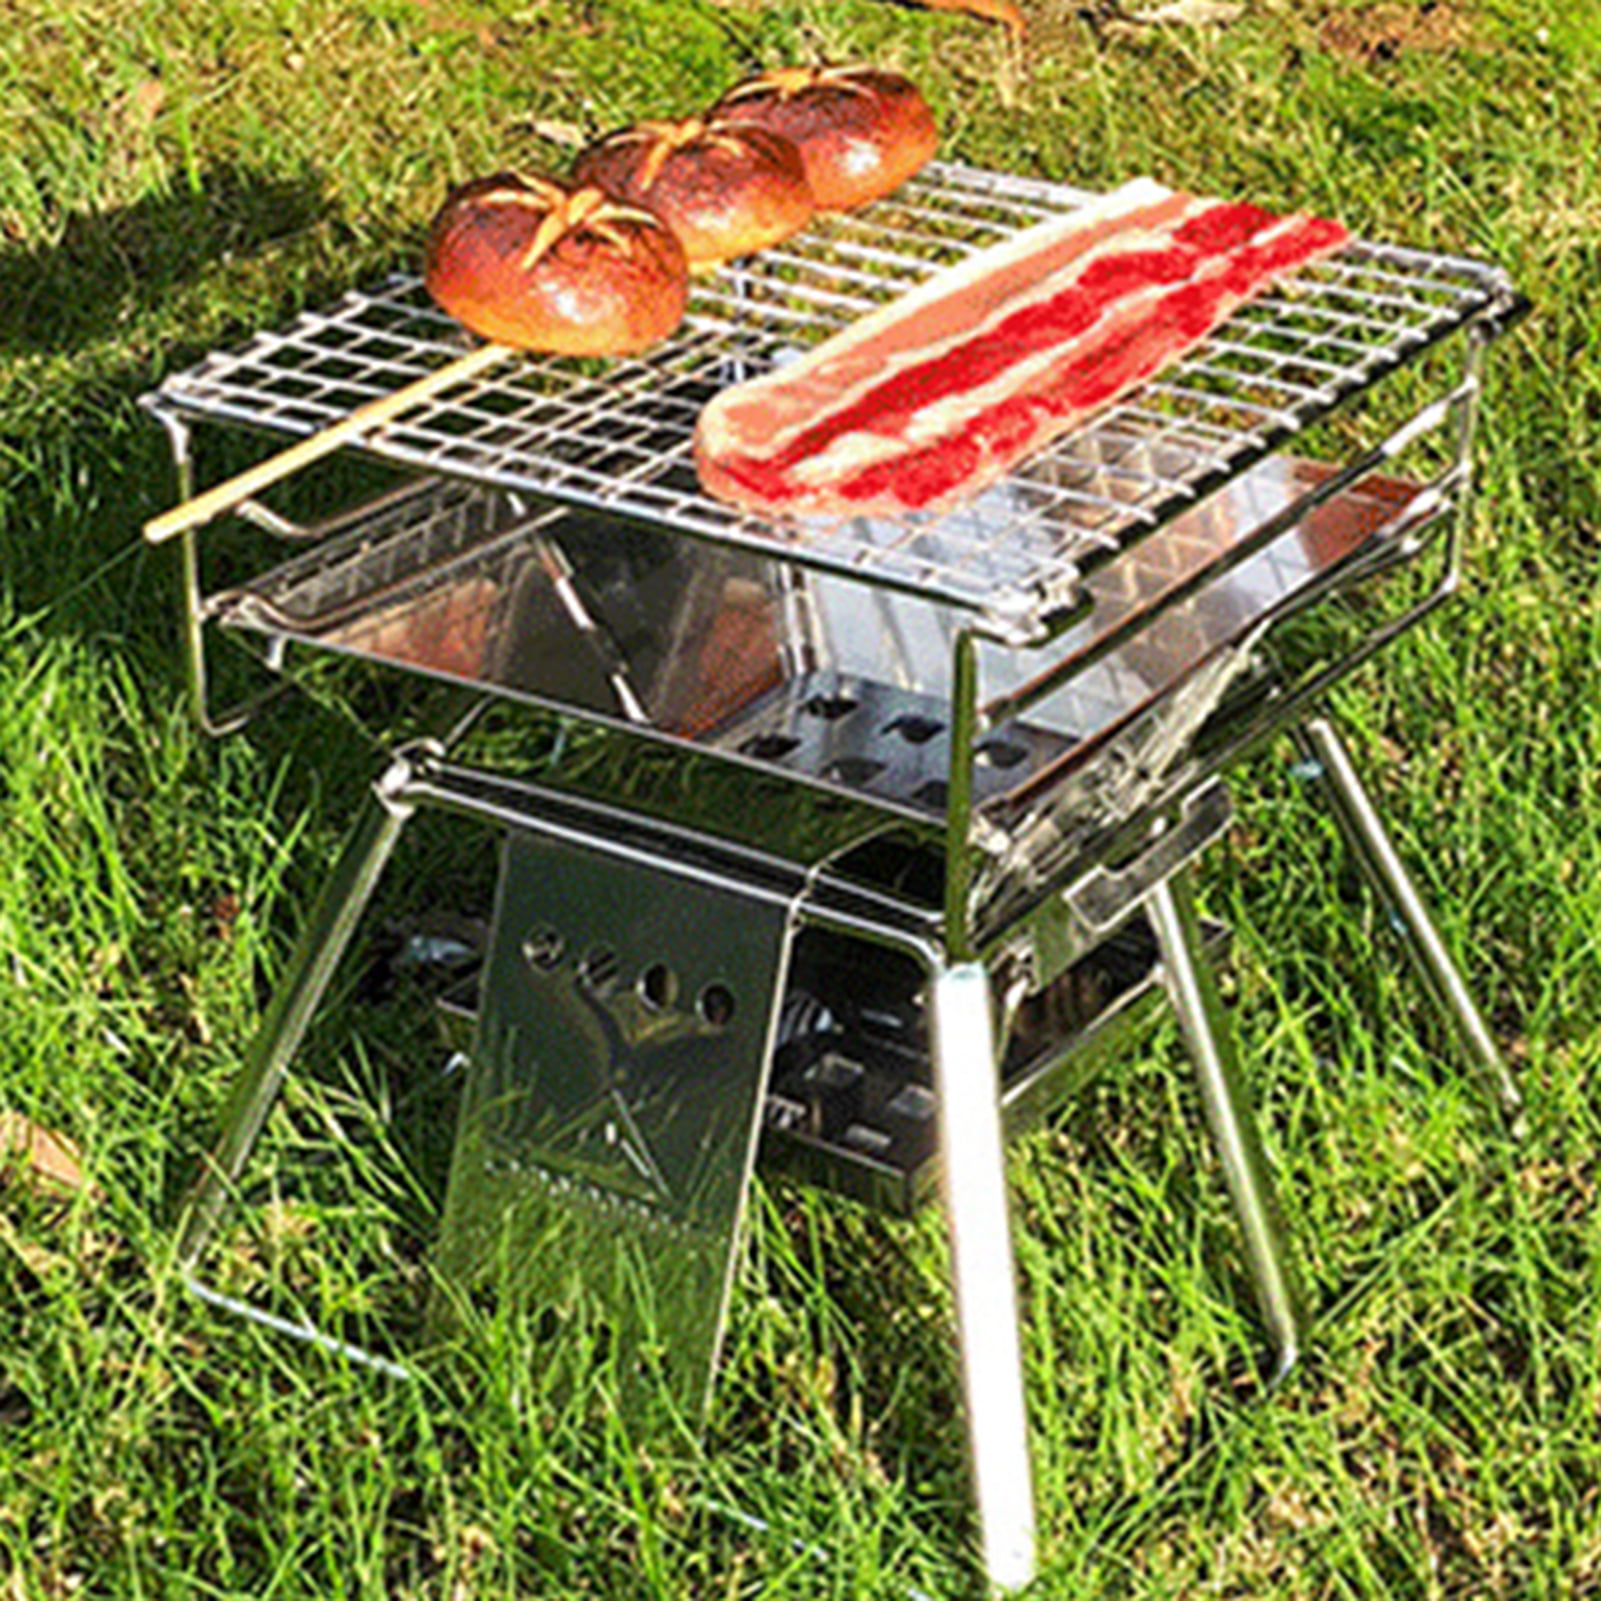 BBQ Portable Steel Barbecue Round 14"Grill for Gardens/Picnics/Beach/Camping 